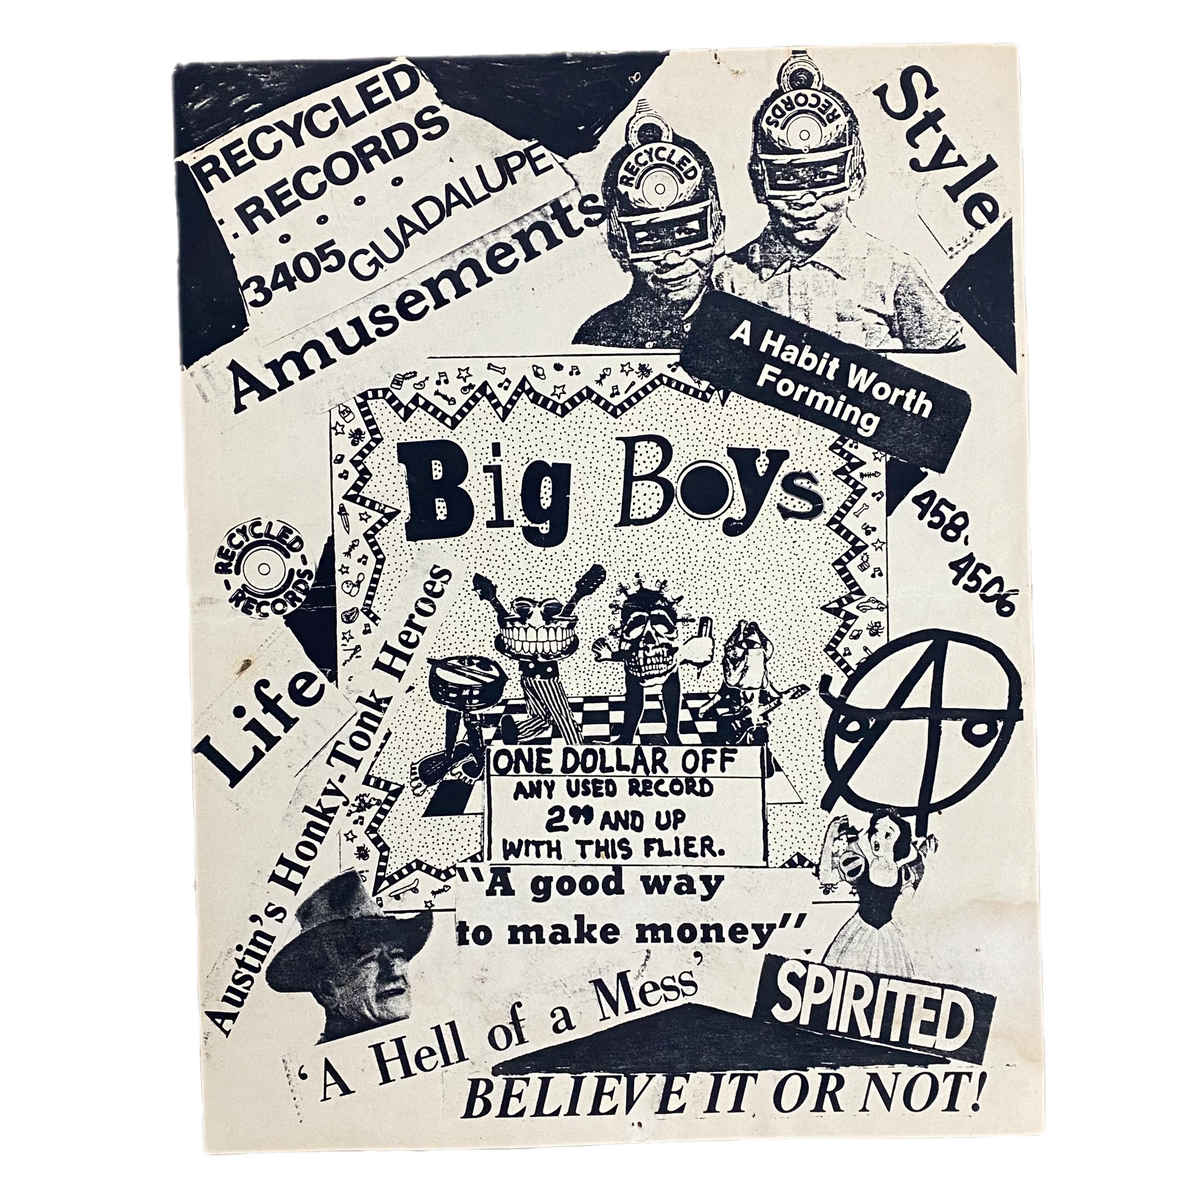 Vintage Big Boys &quot;Frat Cars&quot; Recycled Records Flyer